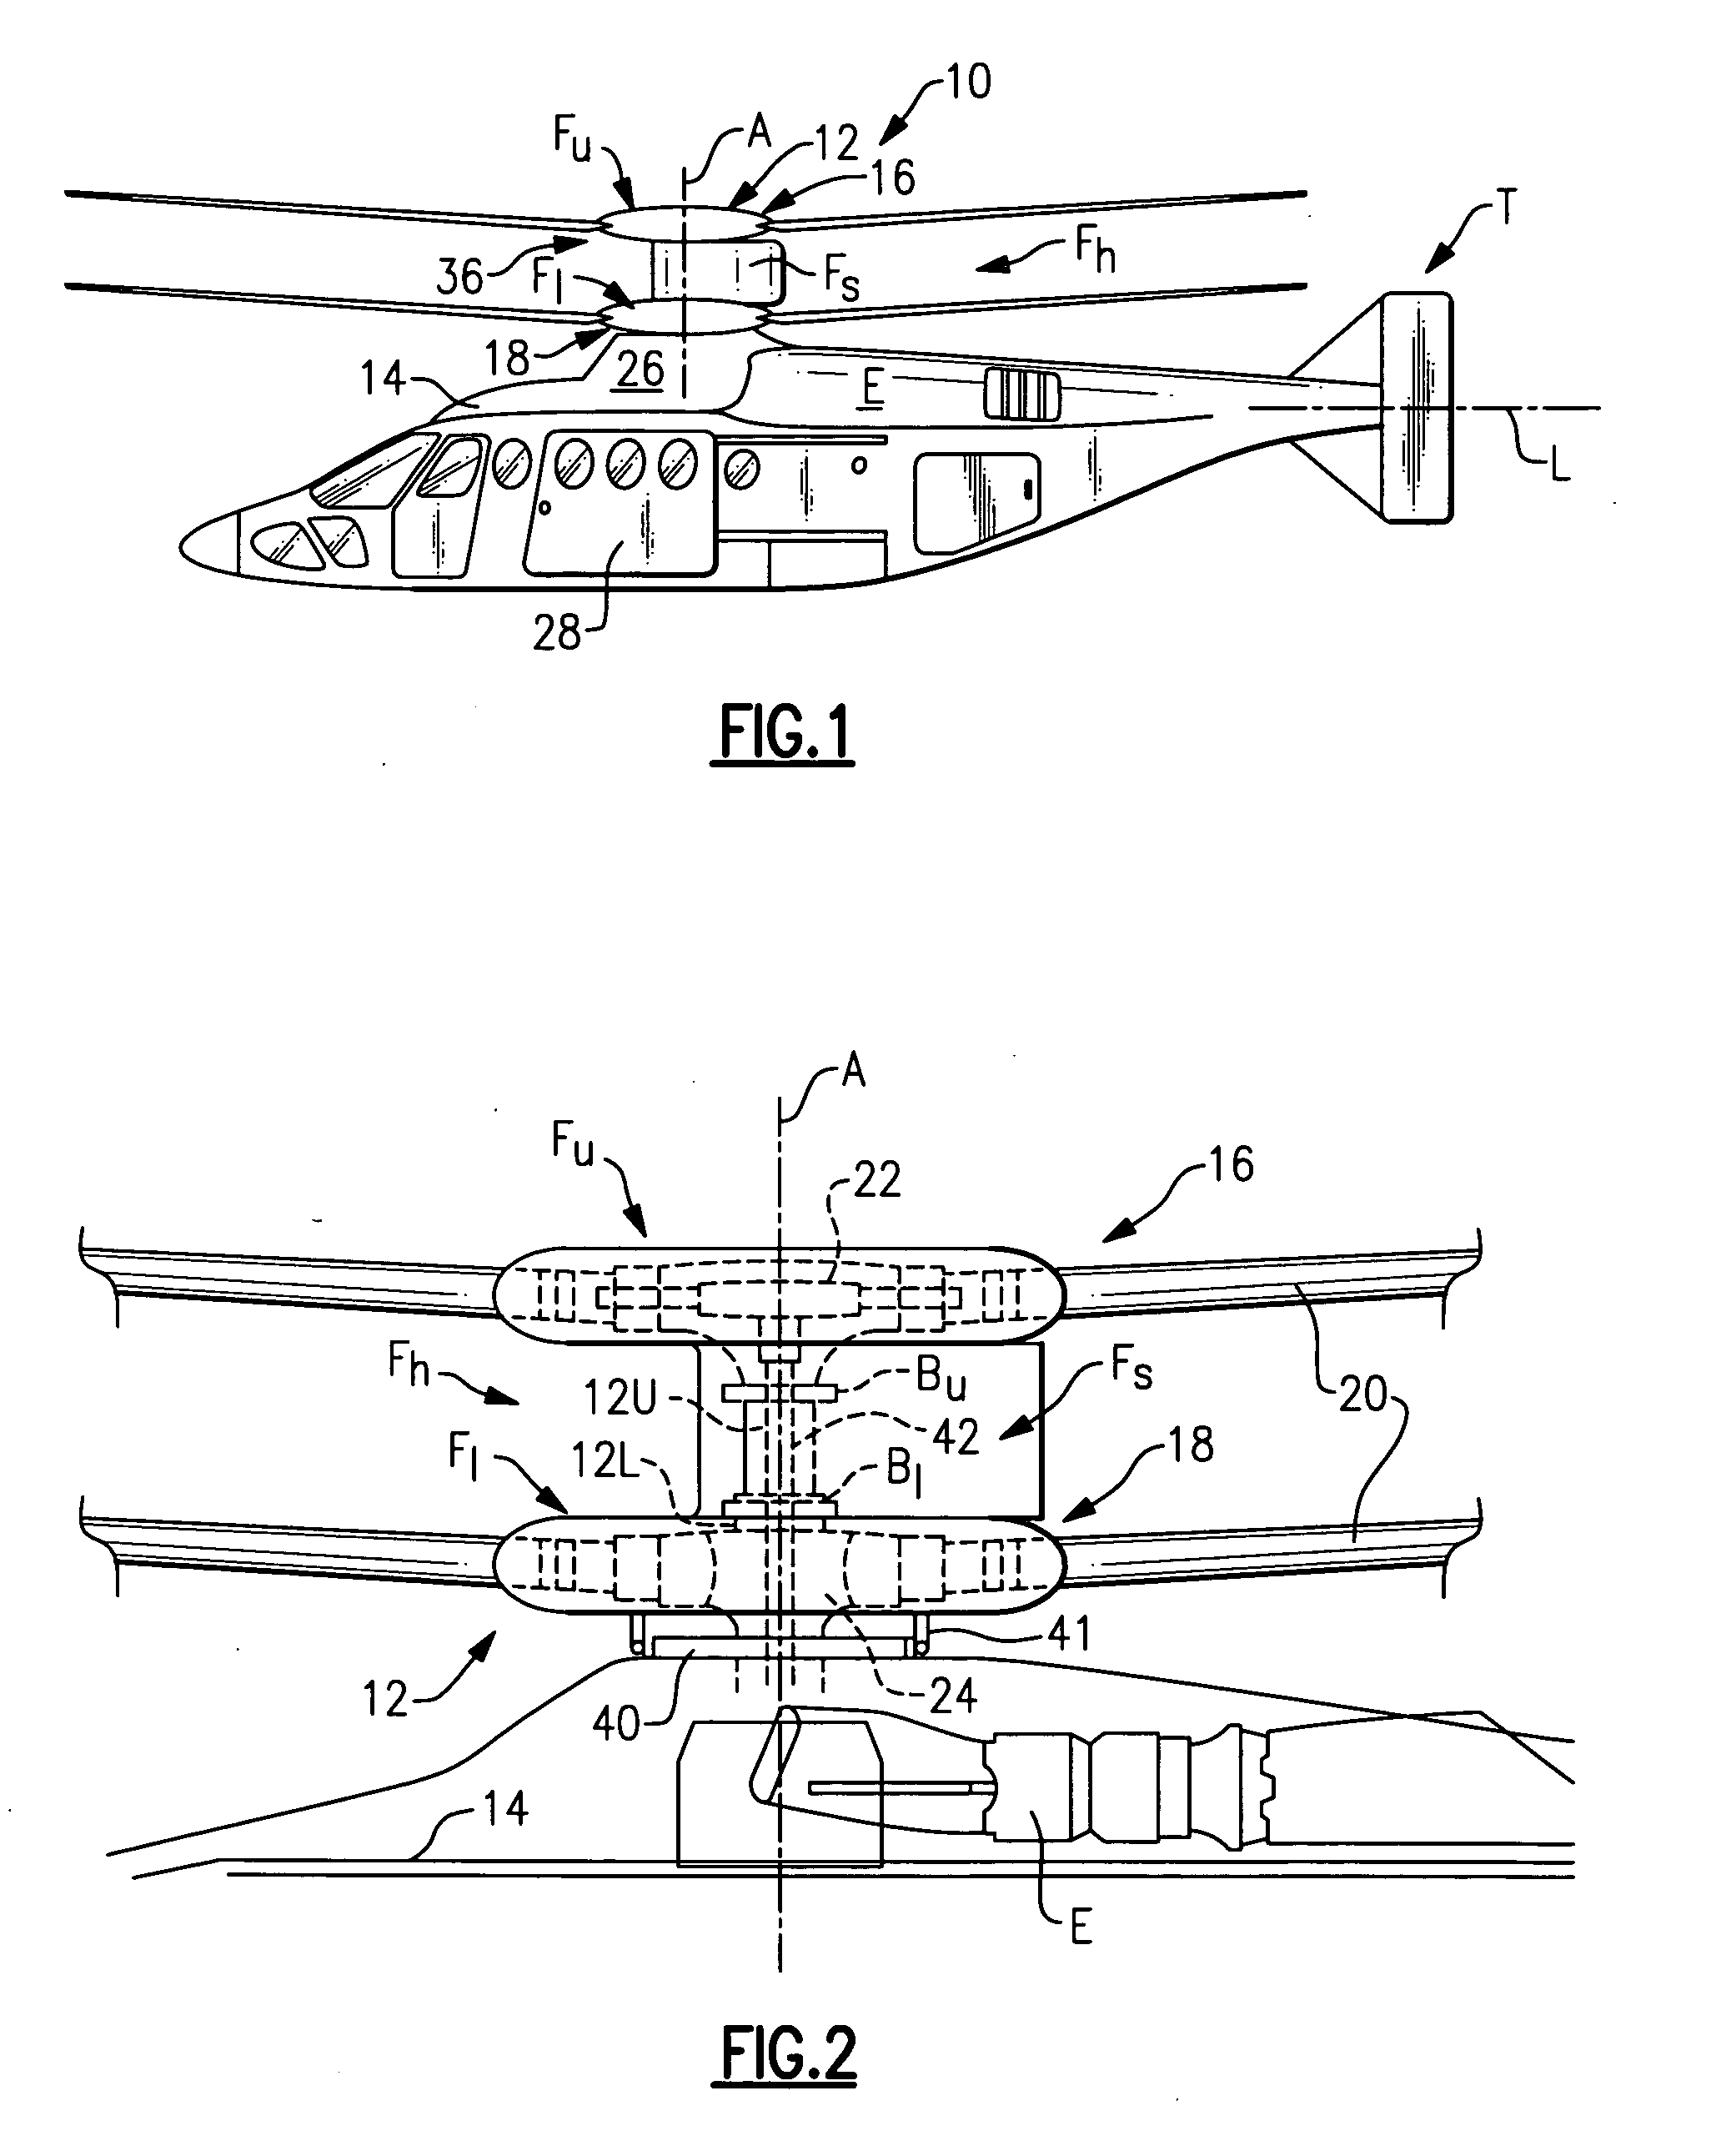 Upper rotor control system for a counter-rotating rotor system